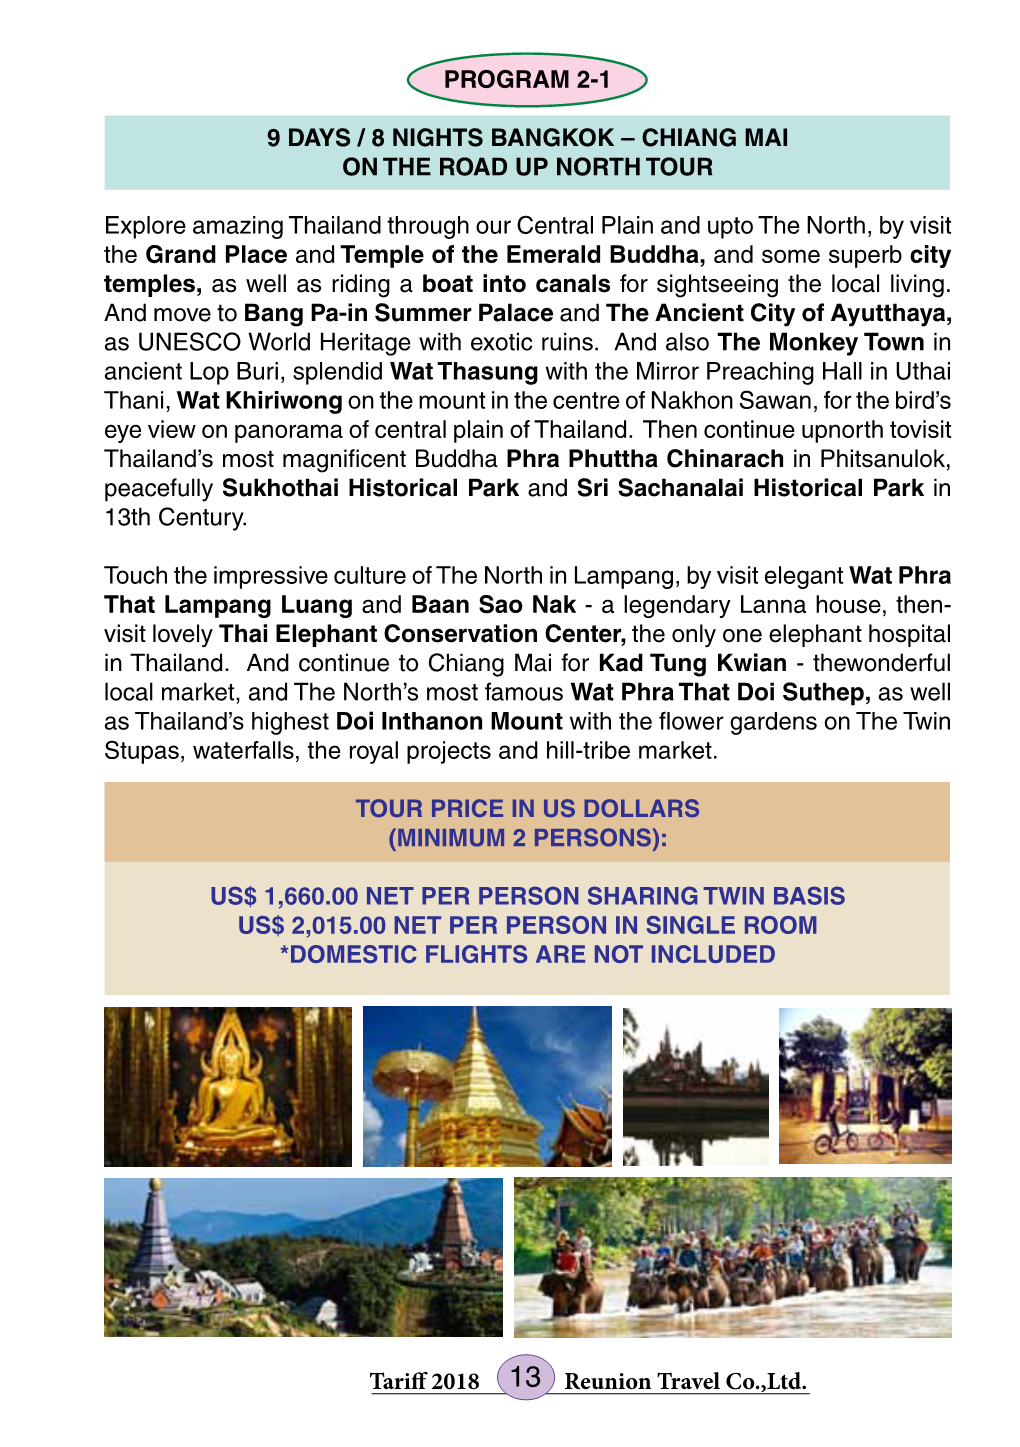 CHIANG MAI on the ROAD up NORTH TOUR Explore A